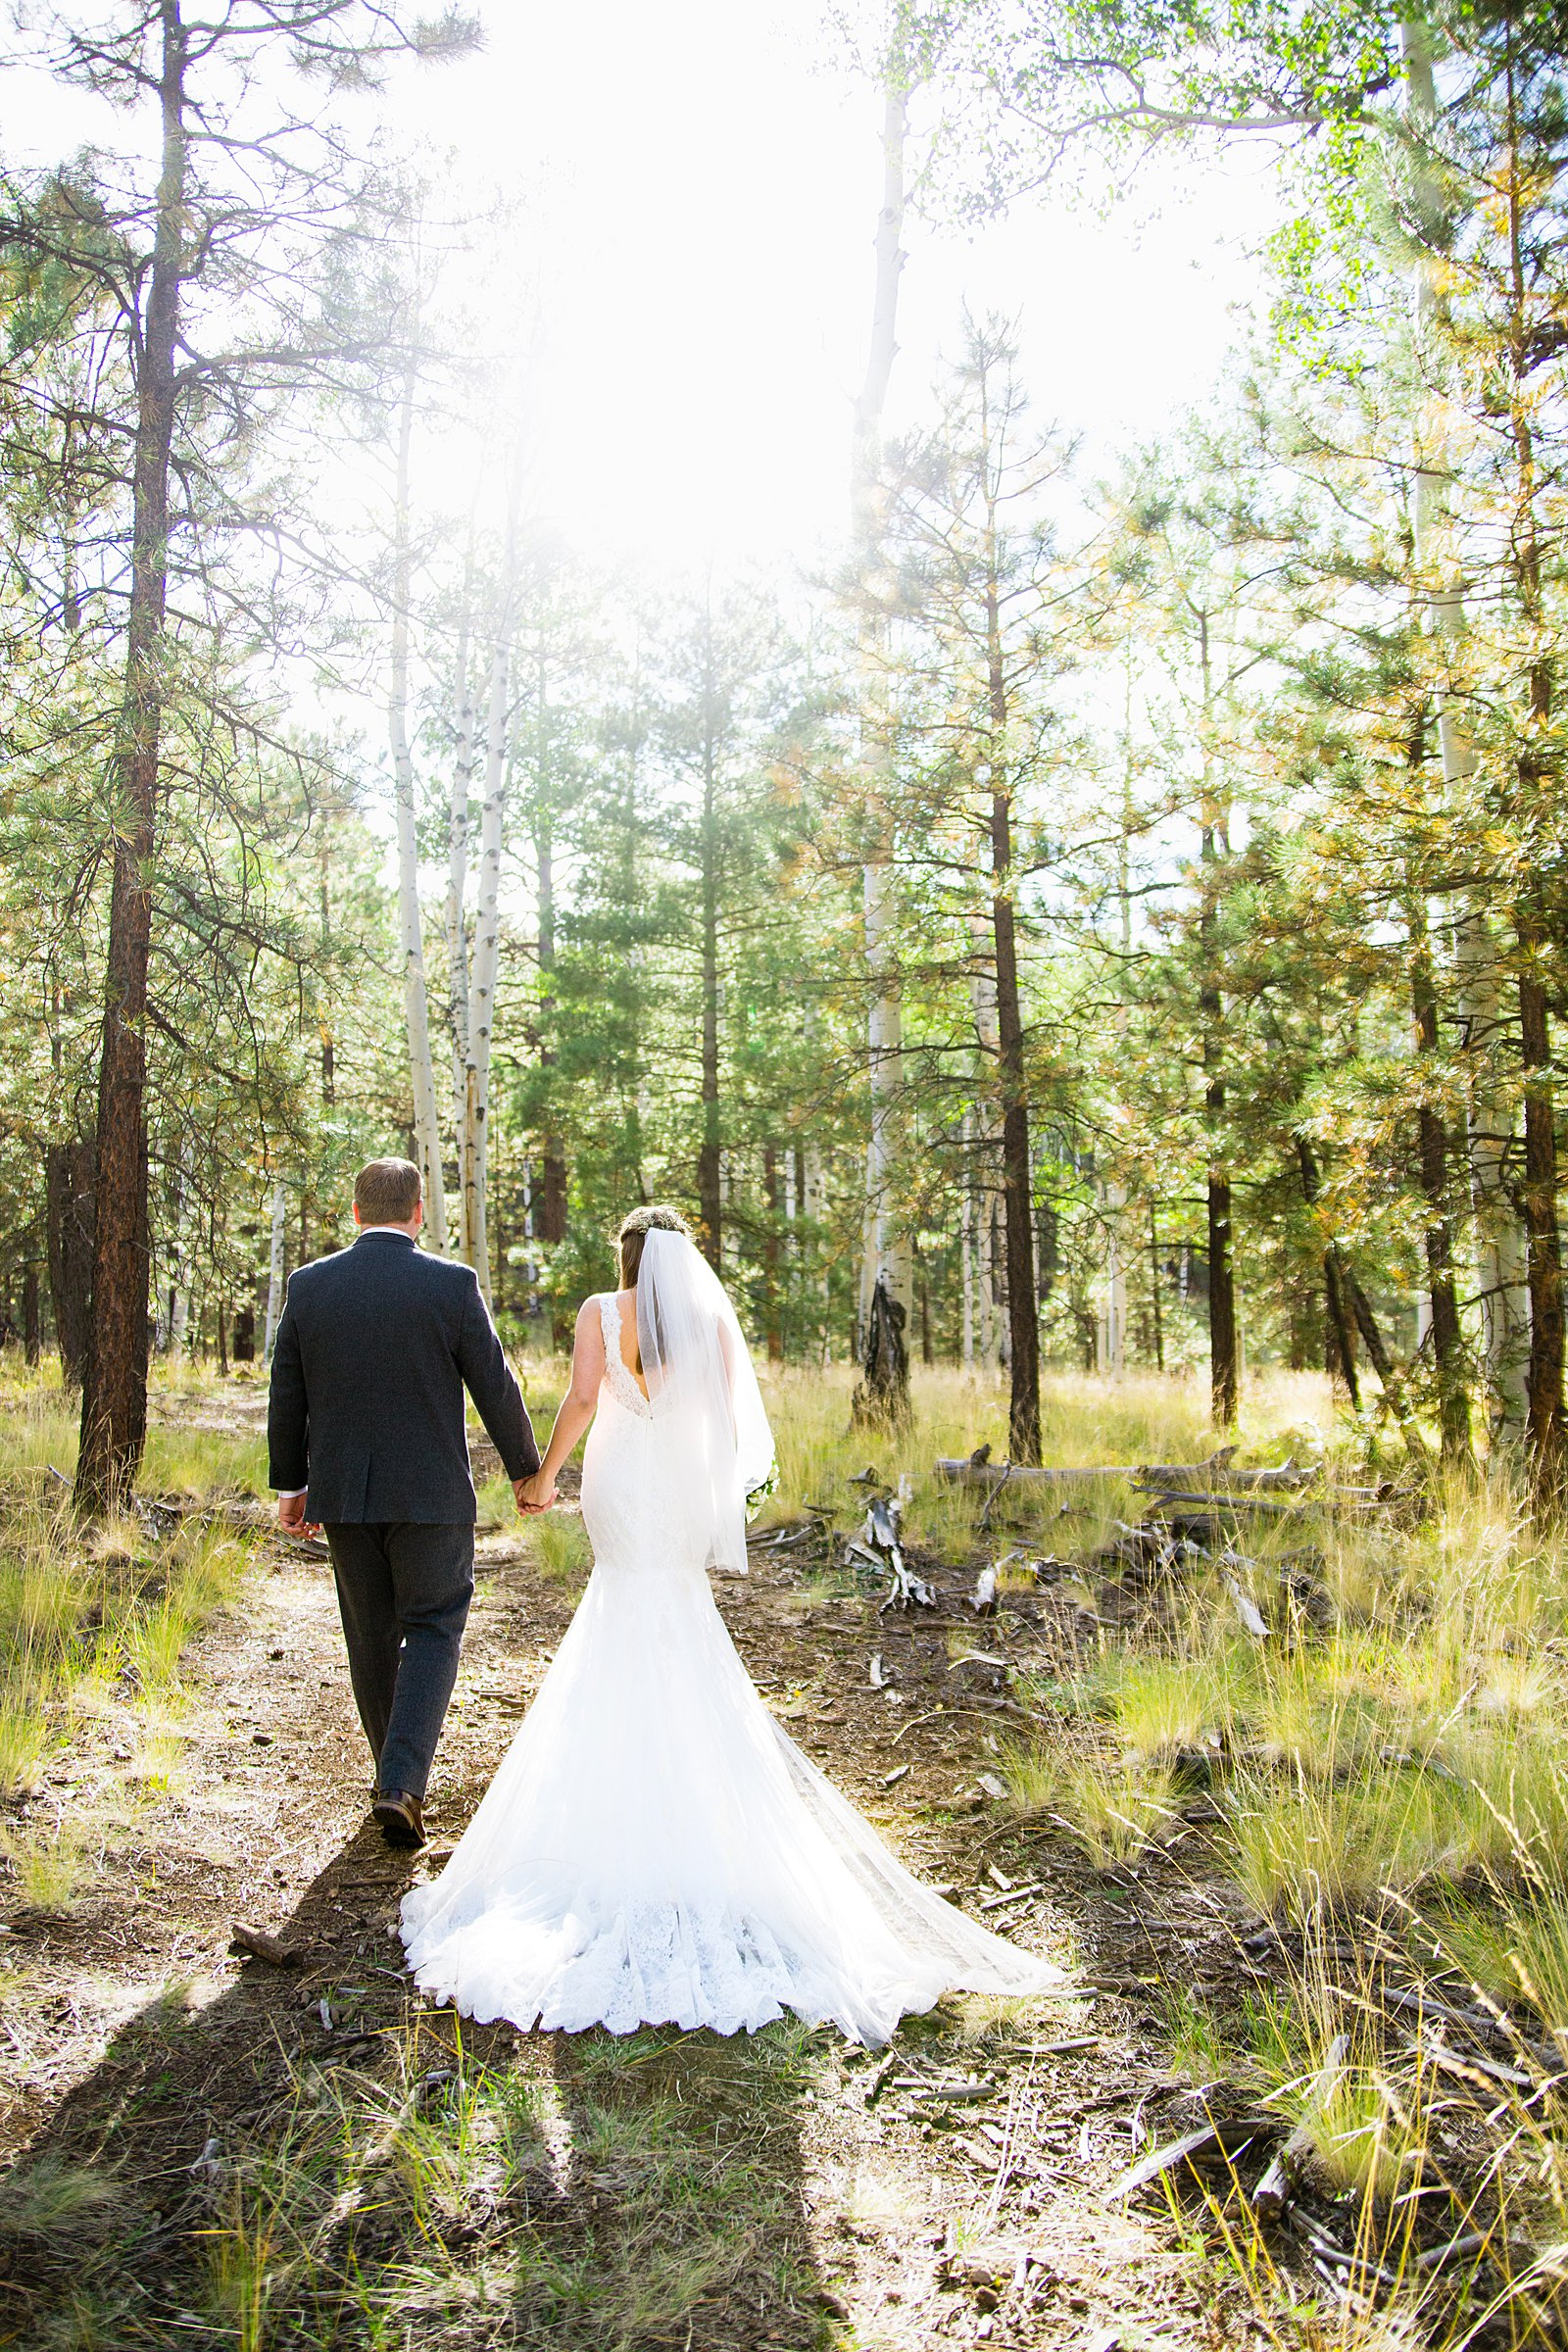 Bride and Groom walking together during their Chapel of the Holy Dove wedding by Flagstaff wedding photographer PMA Photography.